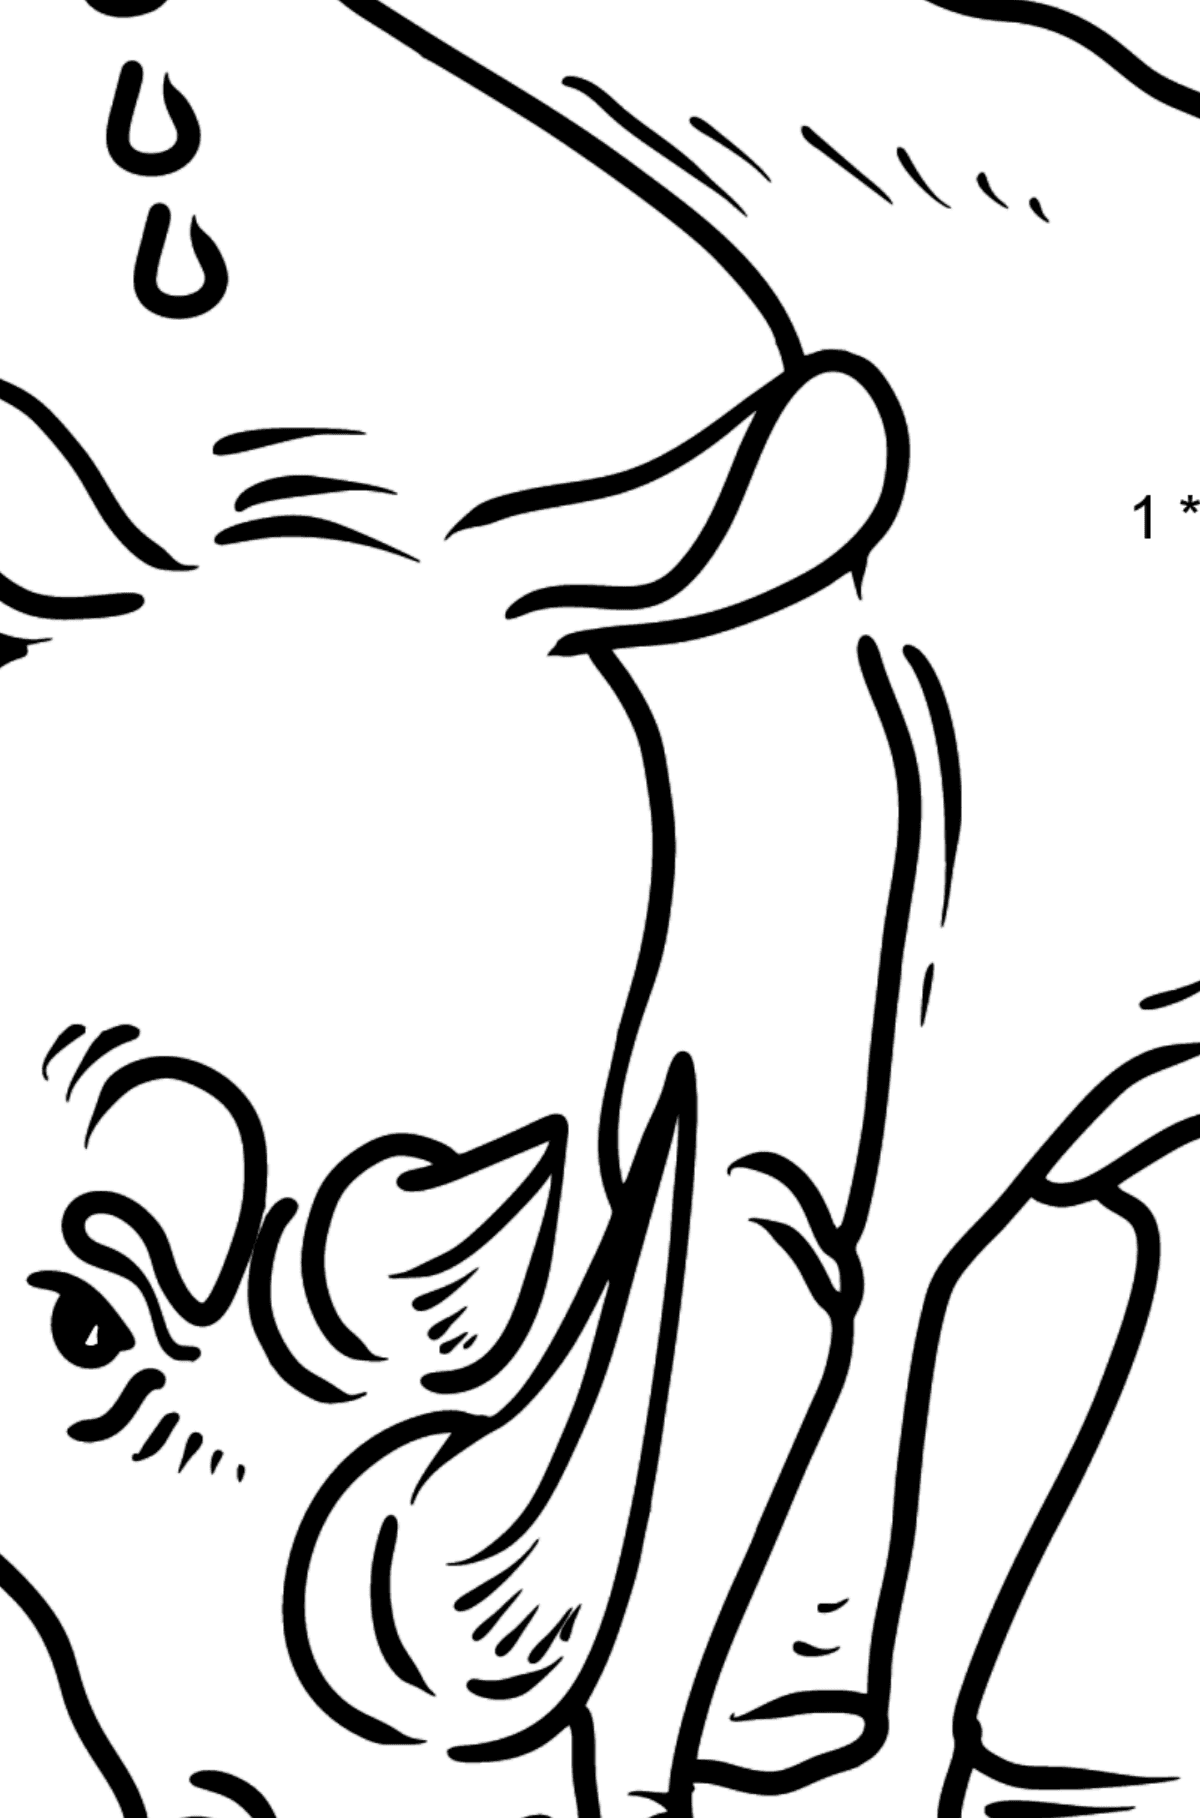 Rhino coloring page - Math Coloring - Multiplication for Kids